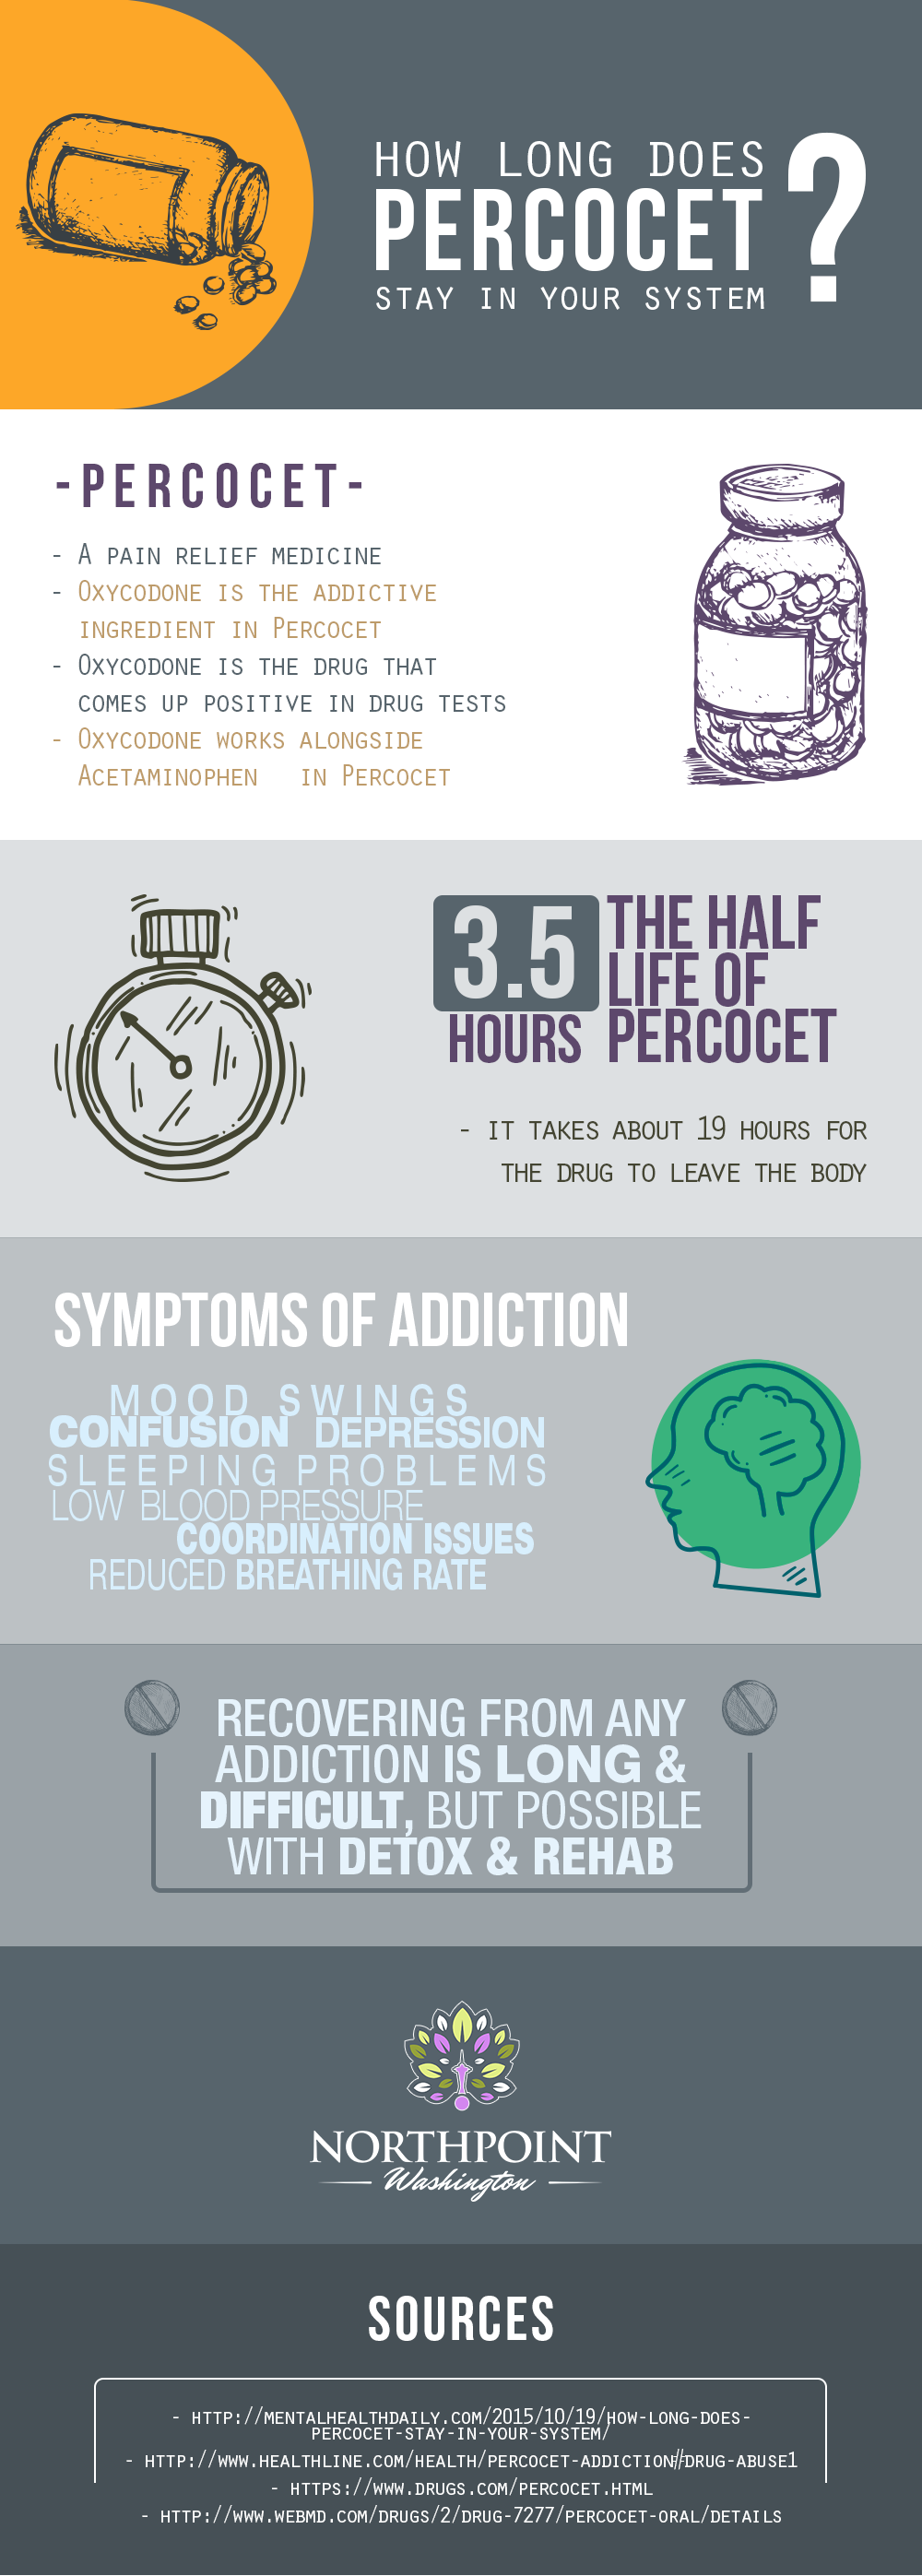 How Long Does Percocet Stay in Your System?